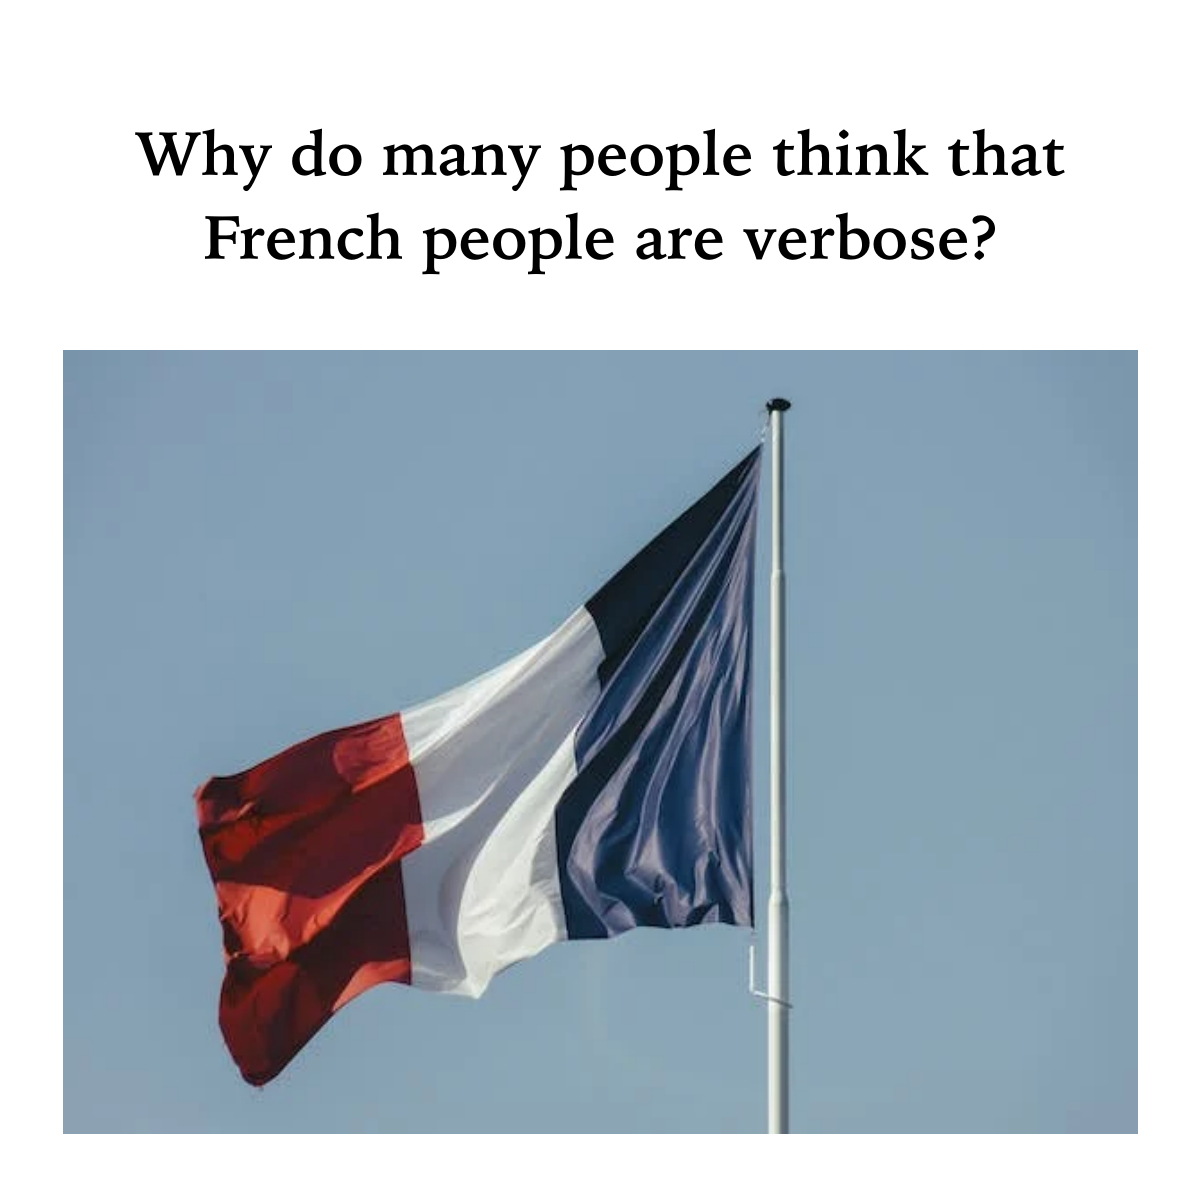 Why do many people think that French people are verbose?